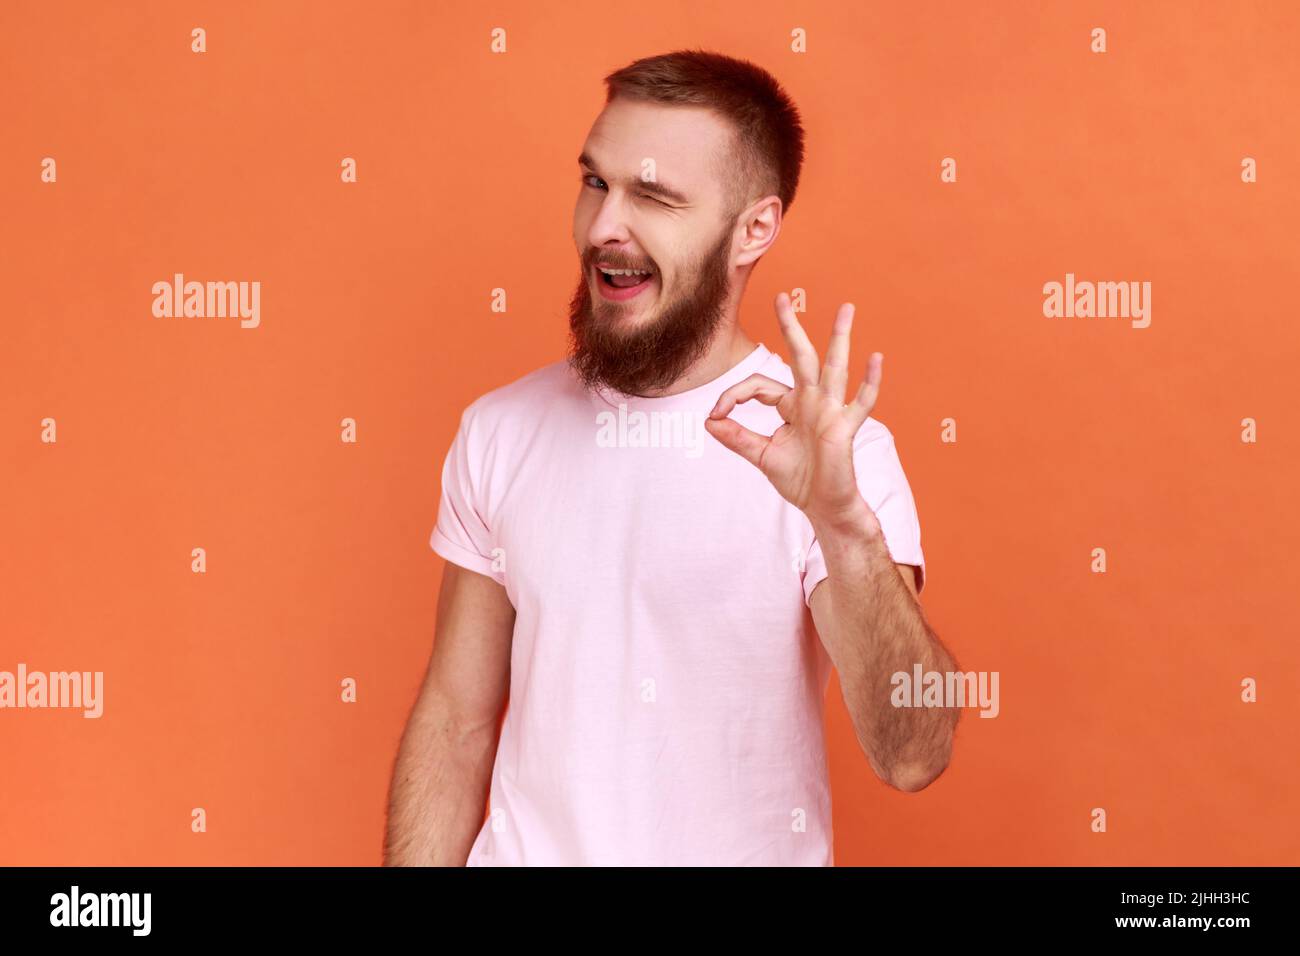 Portrait of bearded man standing with thumbs up, like gesture, demonstrating approval and agree with suggestion, wearing pink T-shirt. Indoor studio shot isolated on orange background. Stock Photo